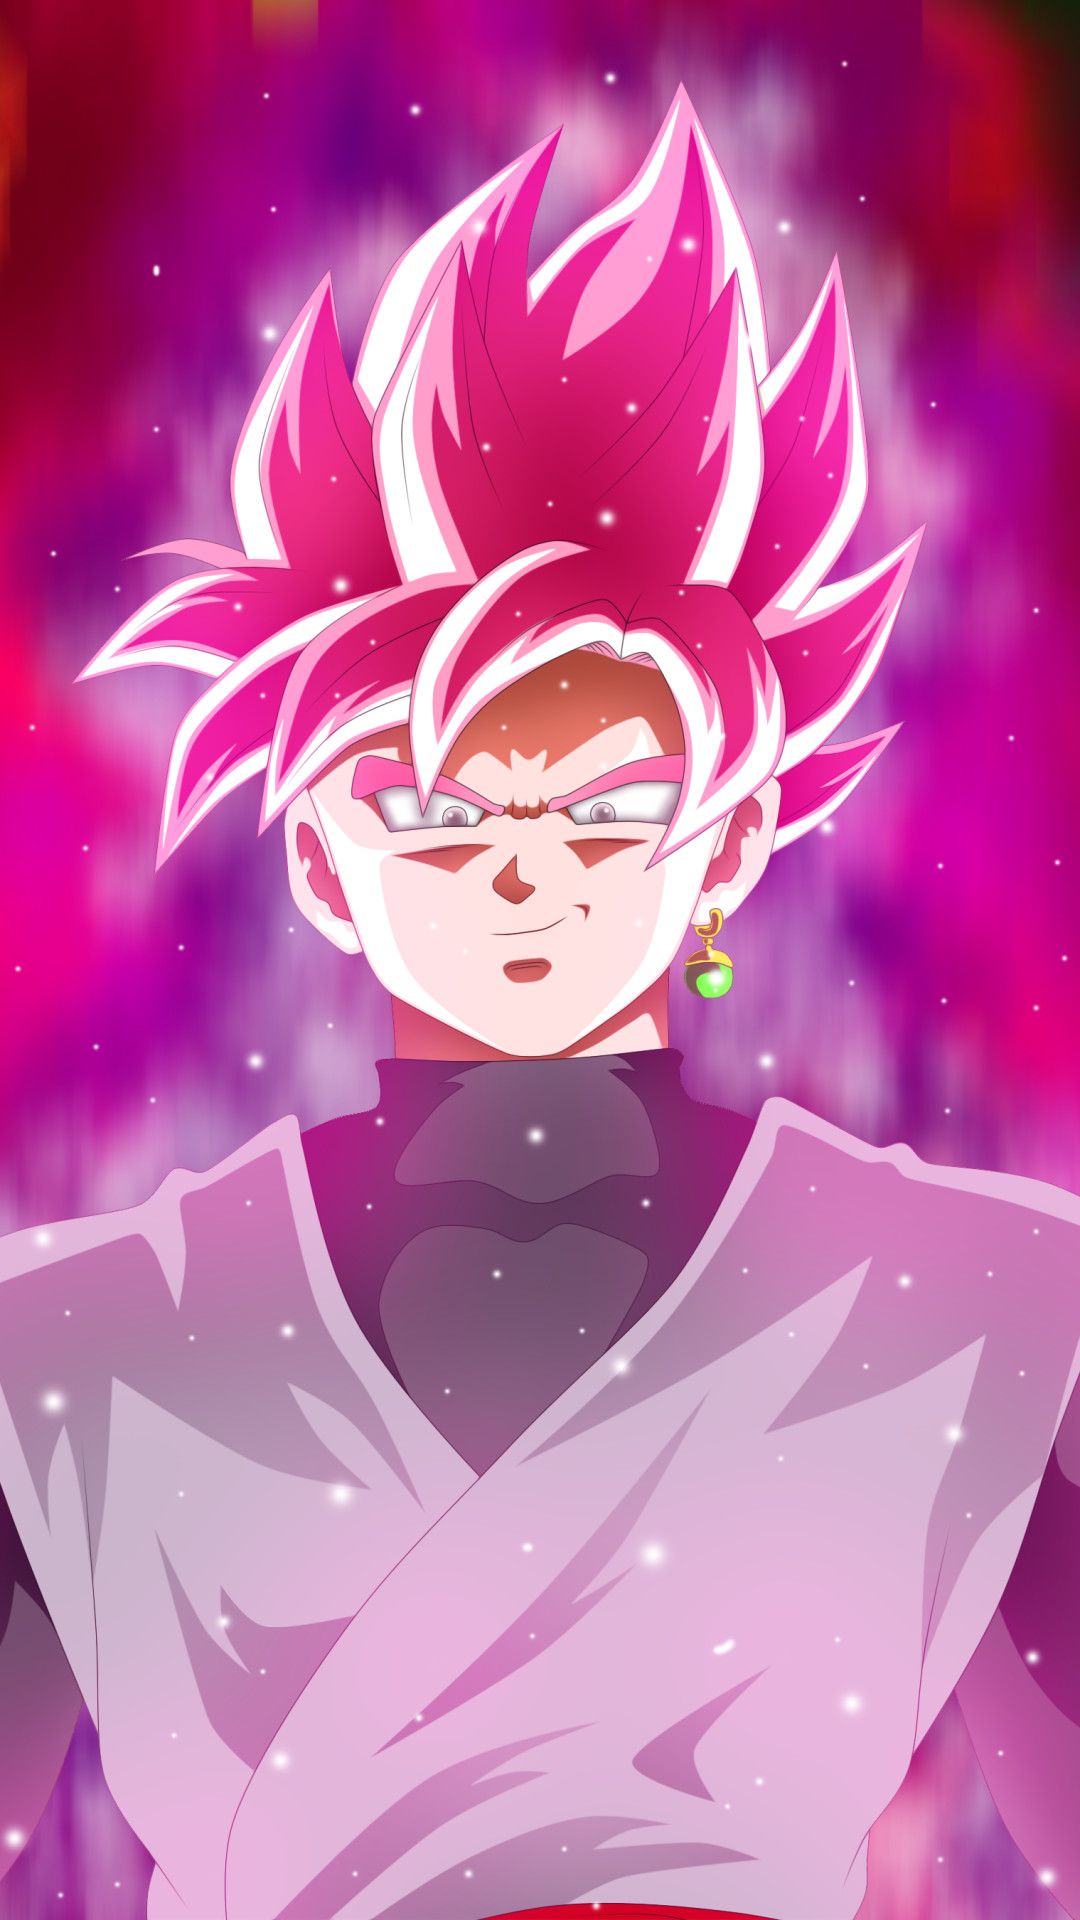 Goku Black Wallpapers 4k posted by Zoey Anderson